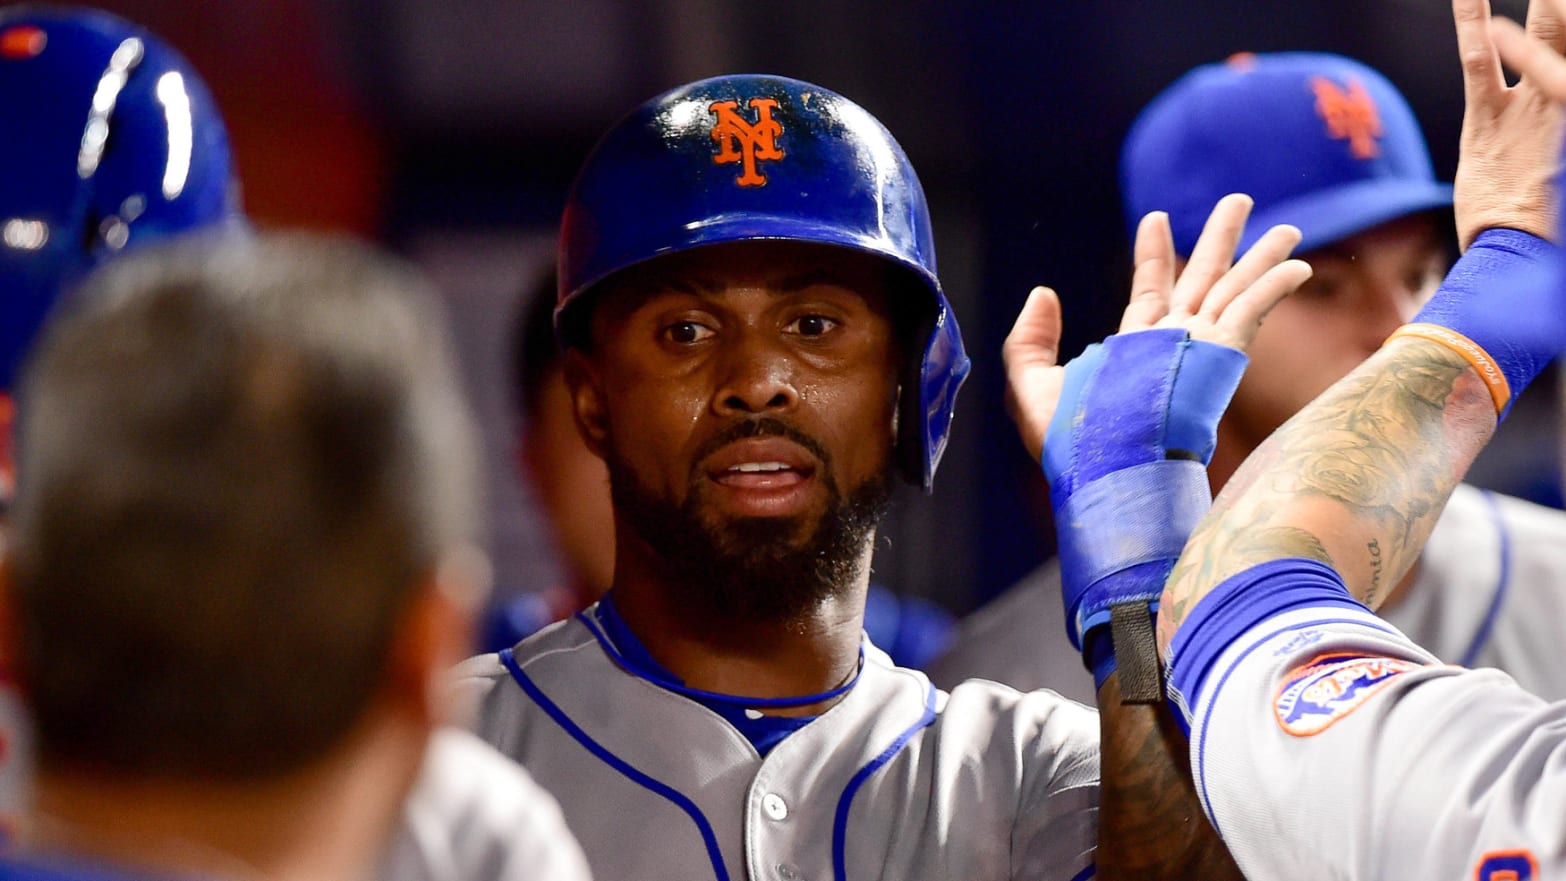 José Reyes 'Cruelly Abandoned' His Secret Daughter, Says Ex-Lover